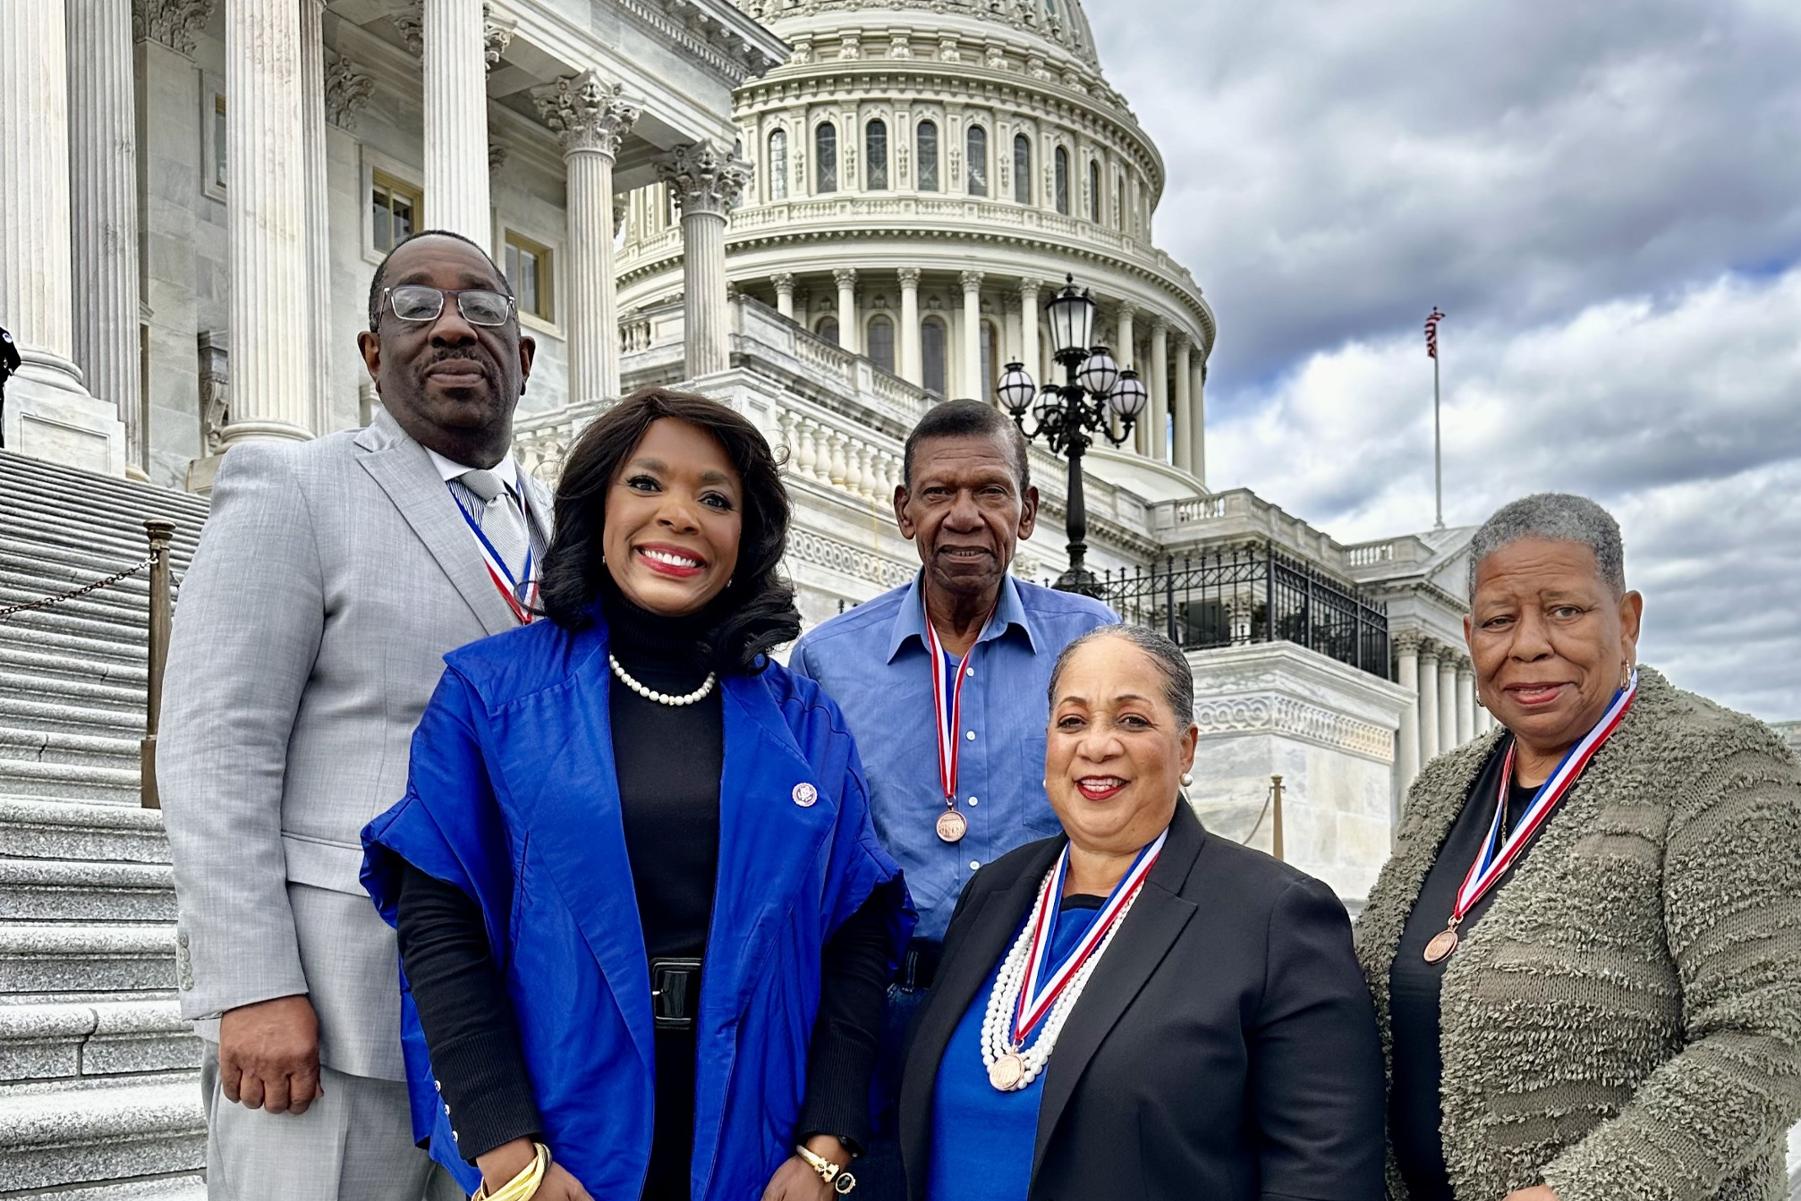 Read More - Rep. Sewell Brings Original Foot Soldiers as Guests to the State of the Union Exactly 59 Years After Bloody Sunday 